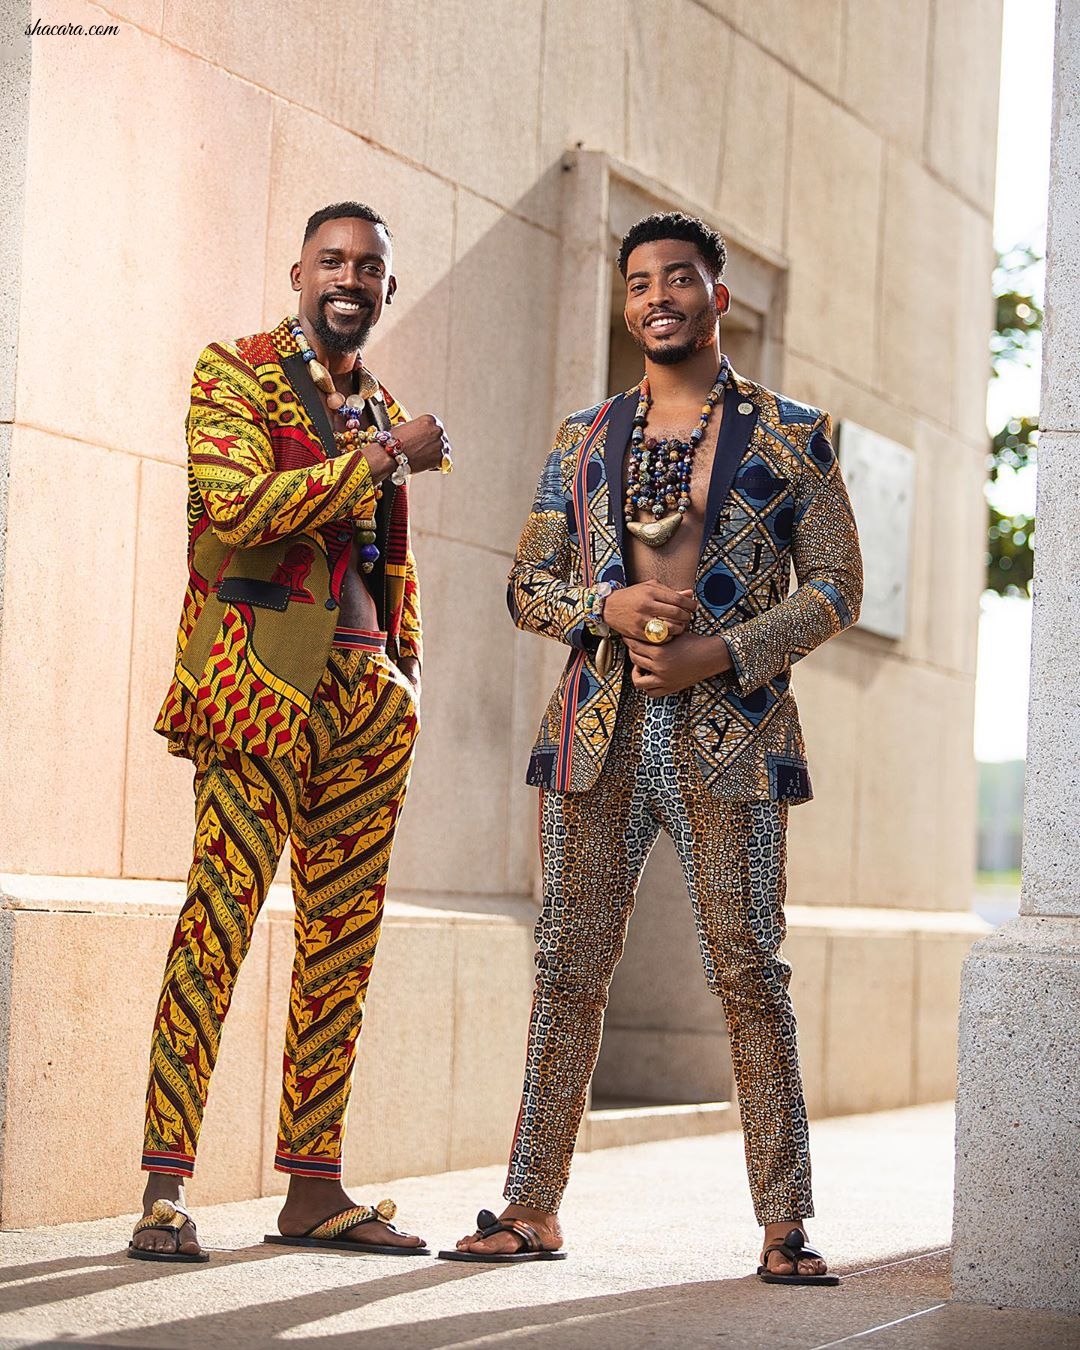 Gh Photographers TwinsDntBeg Just Expose Raw Africanicty In This Extraordinary Fashion Editorial